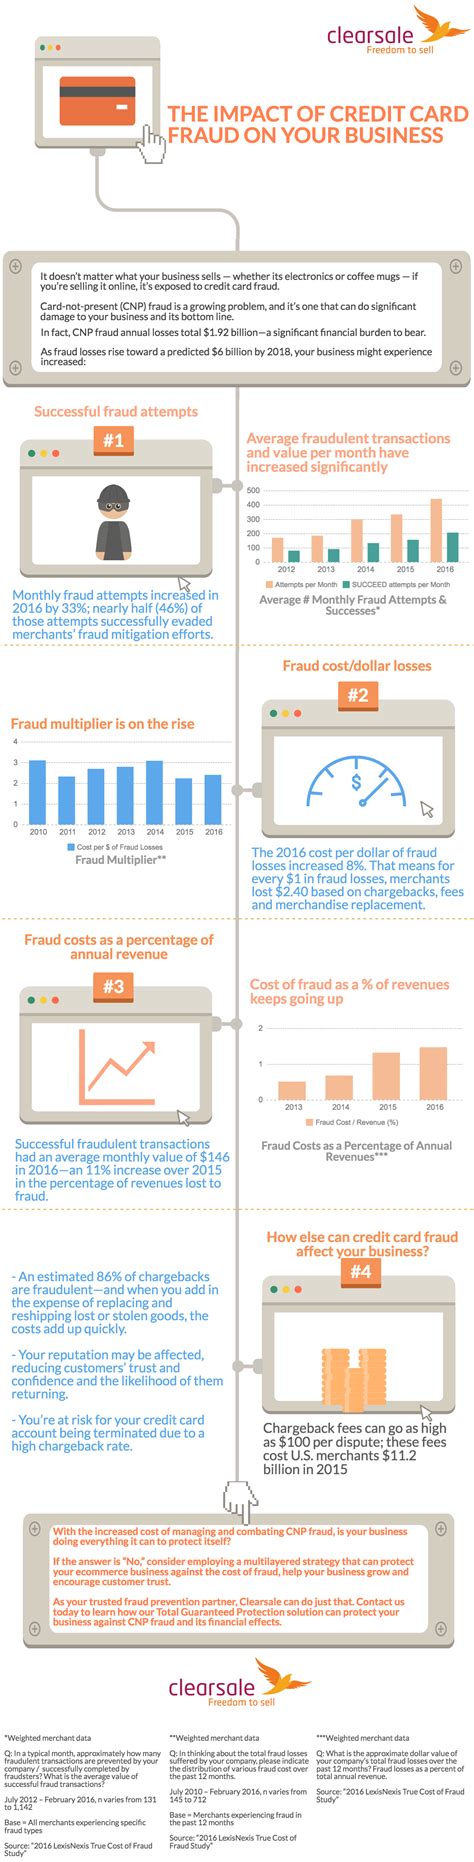 As the most common type of identity theft each year, reported dollar losses in 2019 were about $135 million, according to the u.s. The impact of credit card fraud on your business